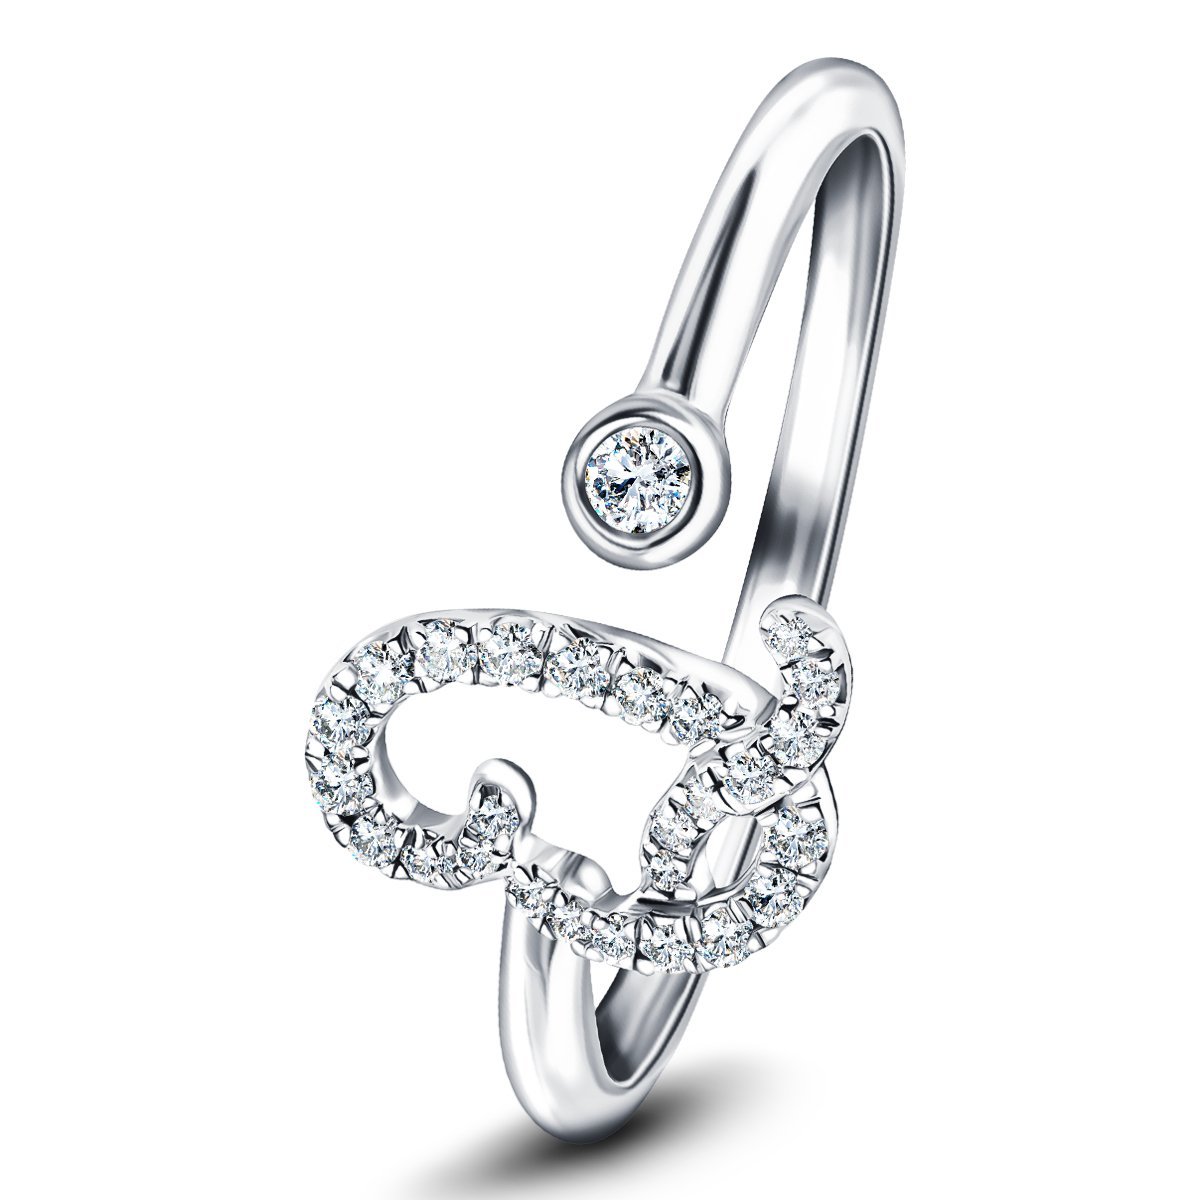 Fancy Diamond Initial 'Q' Ring 0.12ct G/SI Quality in 9k White Gold - All Diamond